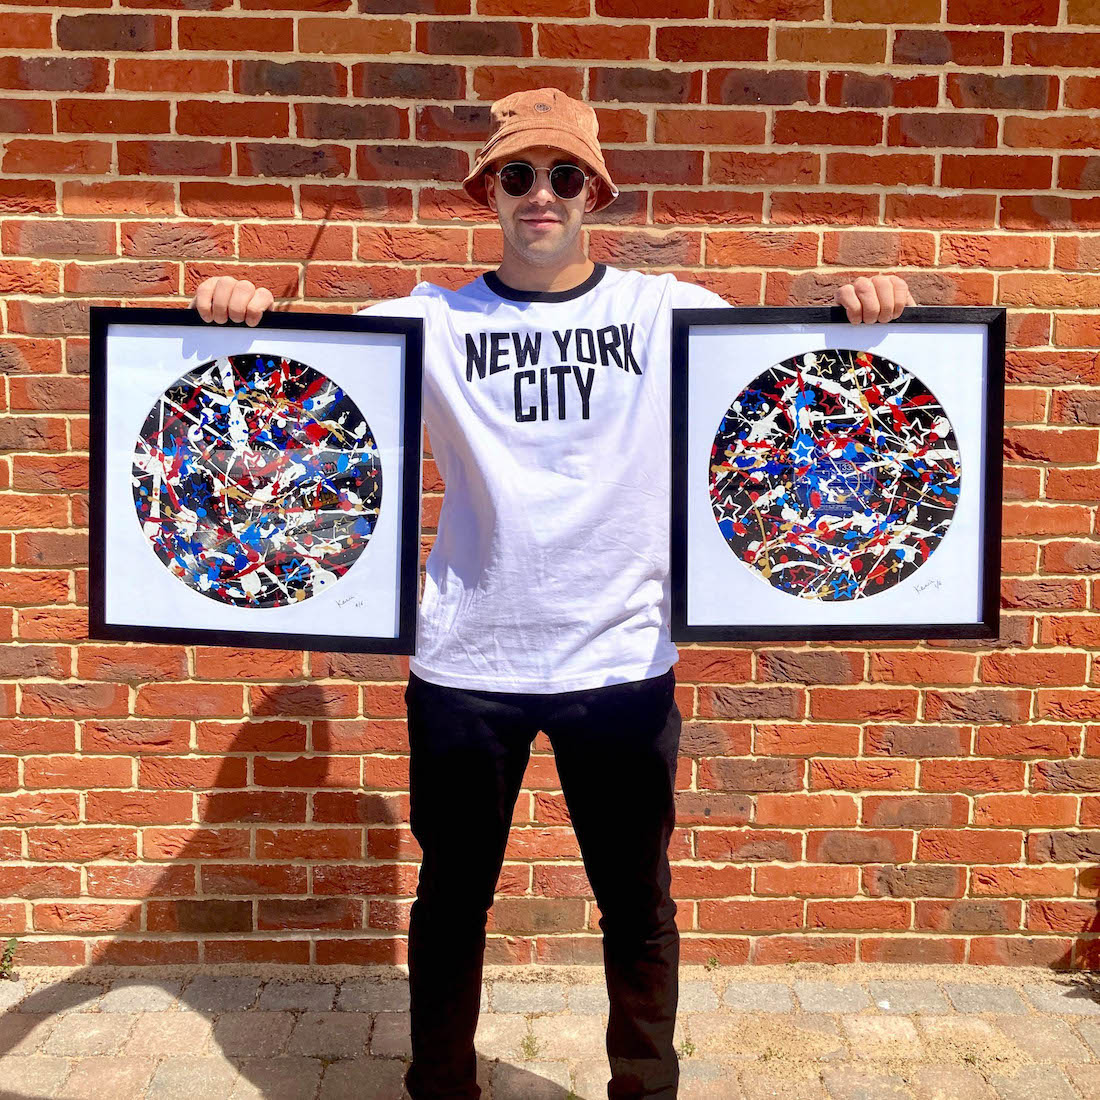 Kerwin with his painted USA-themed vinyl records ready for his New York art exhibition in 2022 | By Kerwin | Jackson Pollock style art